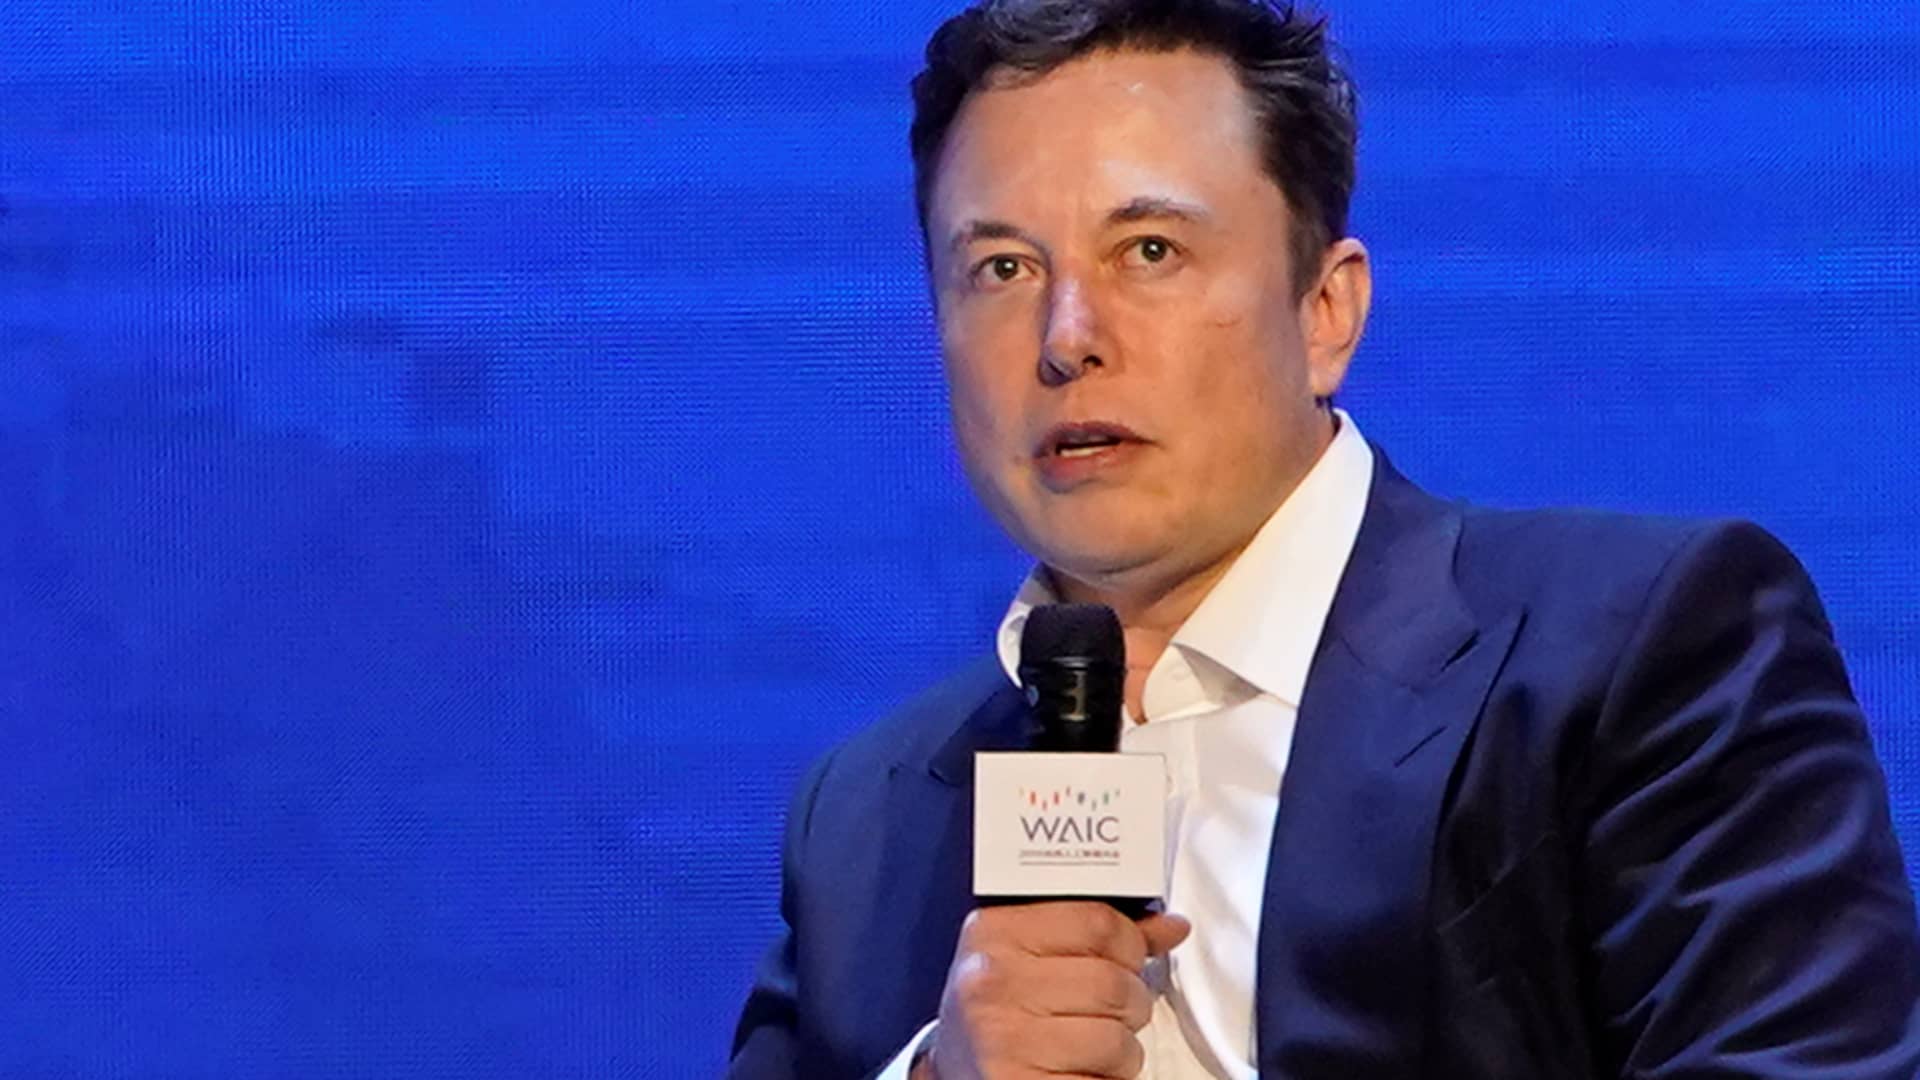 Elon Musk says in court that he doesn’t want to be CEO of any company and tries to walk back SEC insults Auto Recent